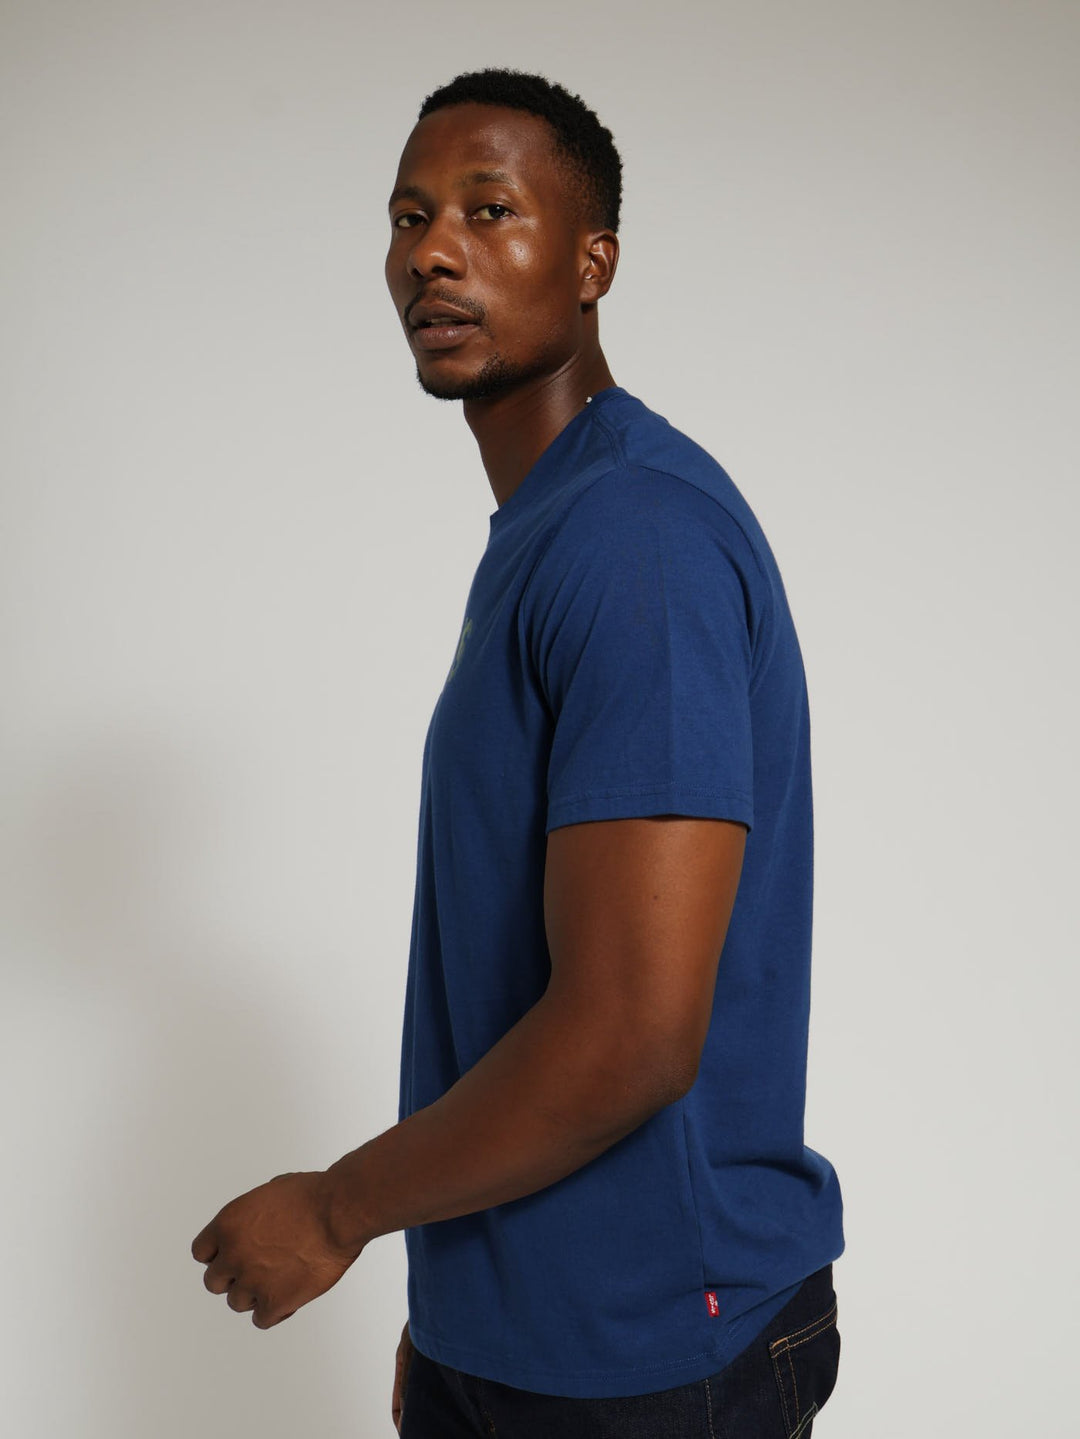 Relaxed Fit Tee - Navy